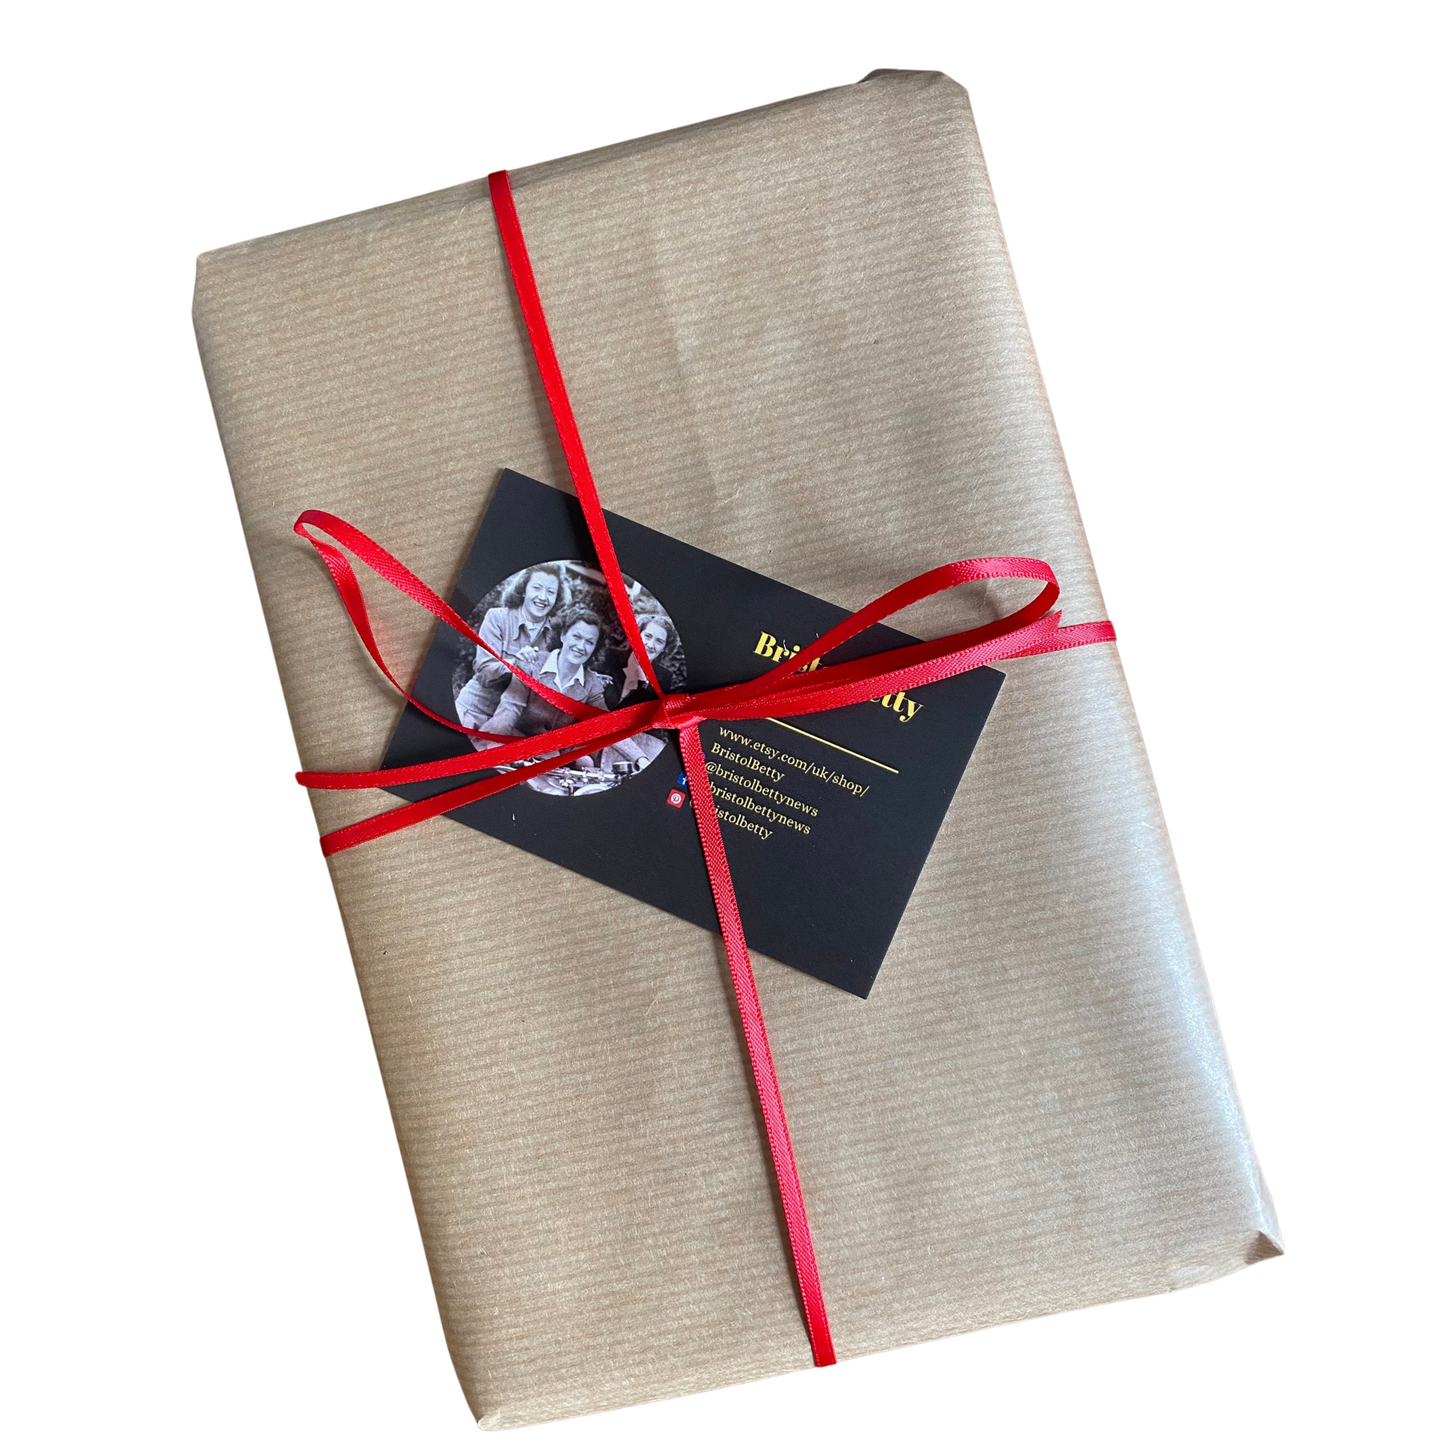 All book orders are gift wrapped in Kraft paper and ribbon